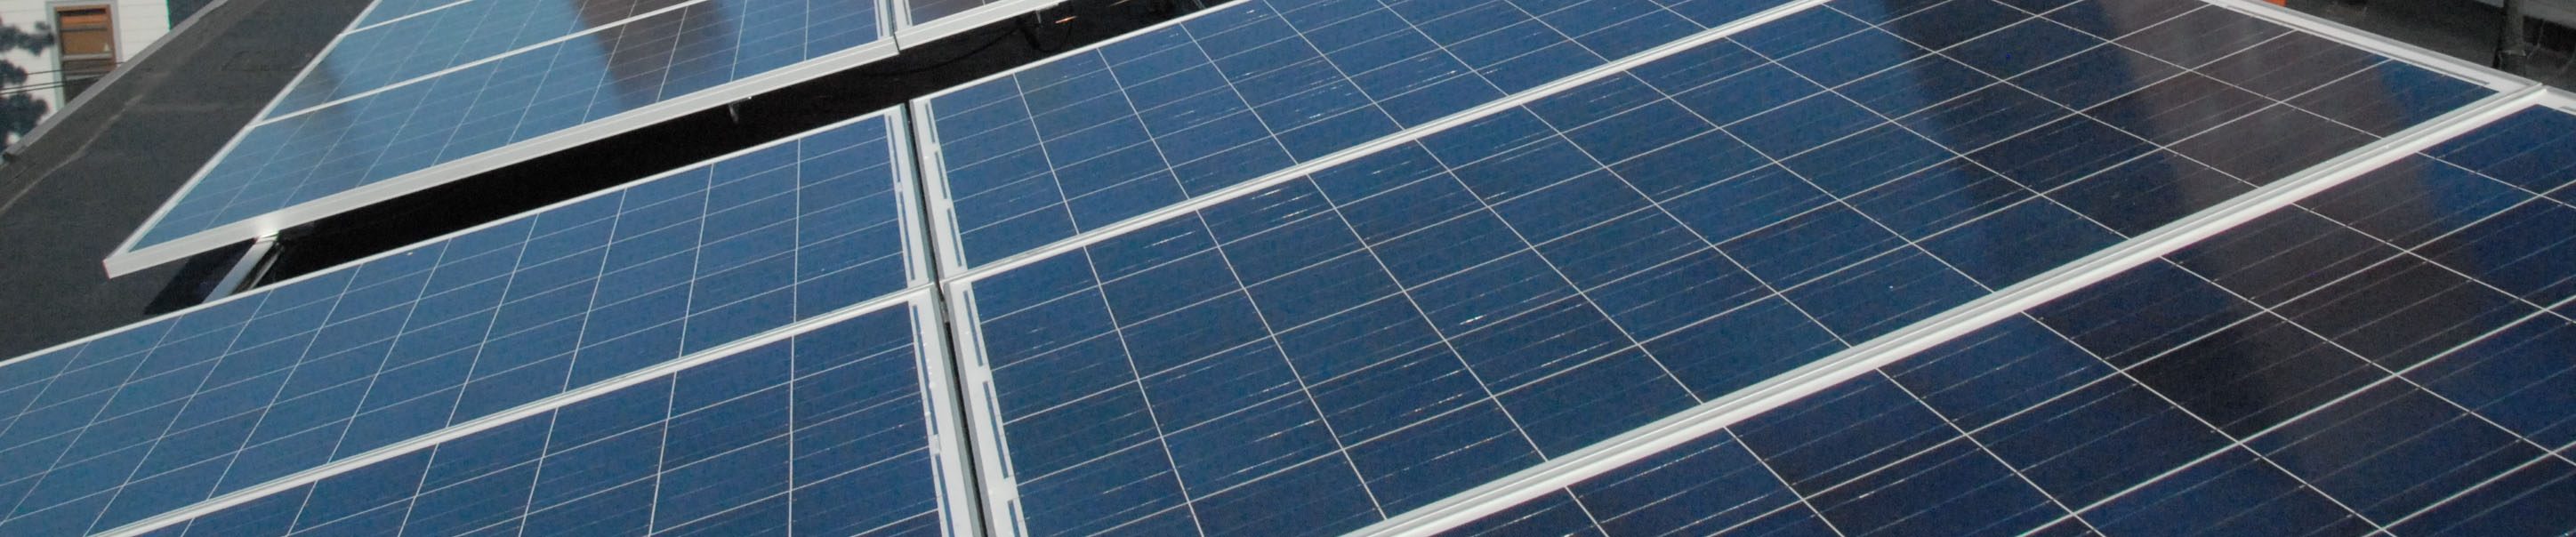 Photograph of rooftop photovoltaic panels